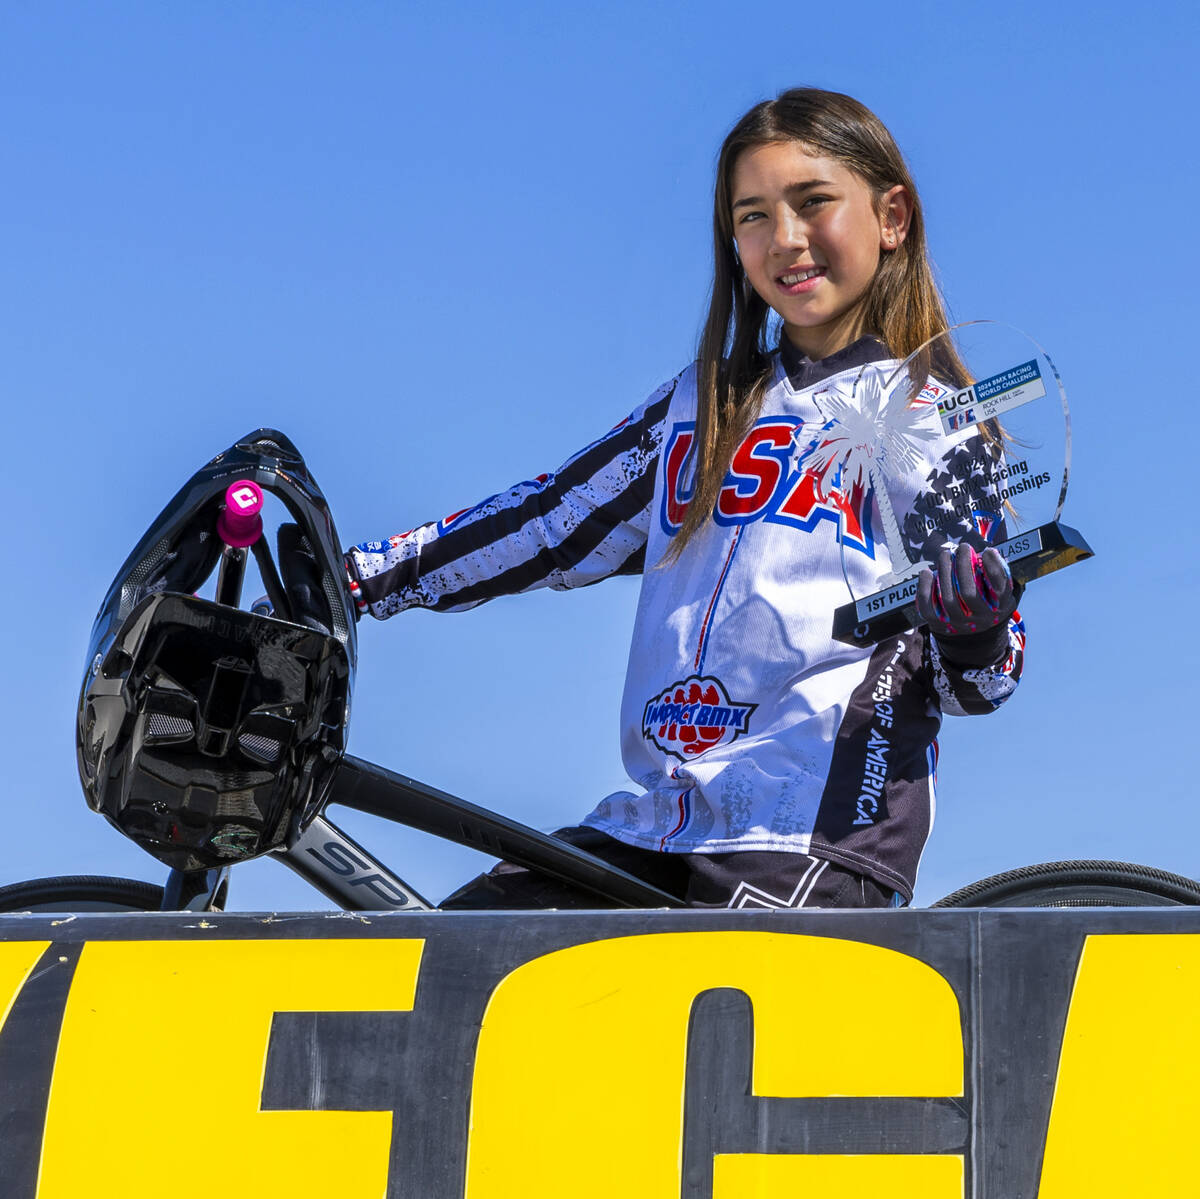 Isabella Smith won the world BMX championship for her age group last month and races at her loc ...